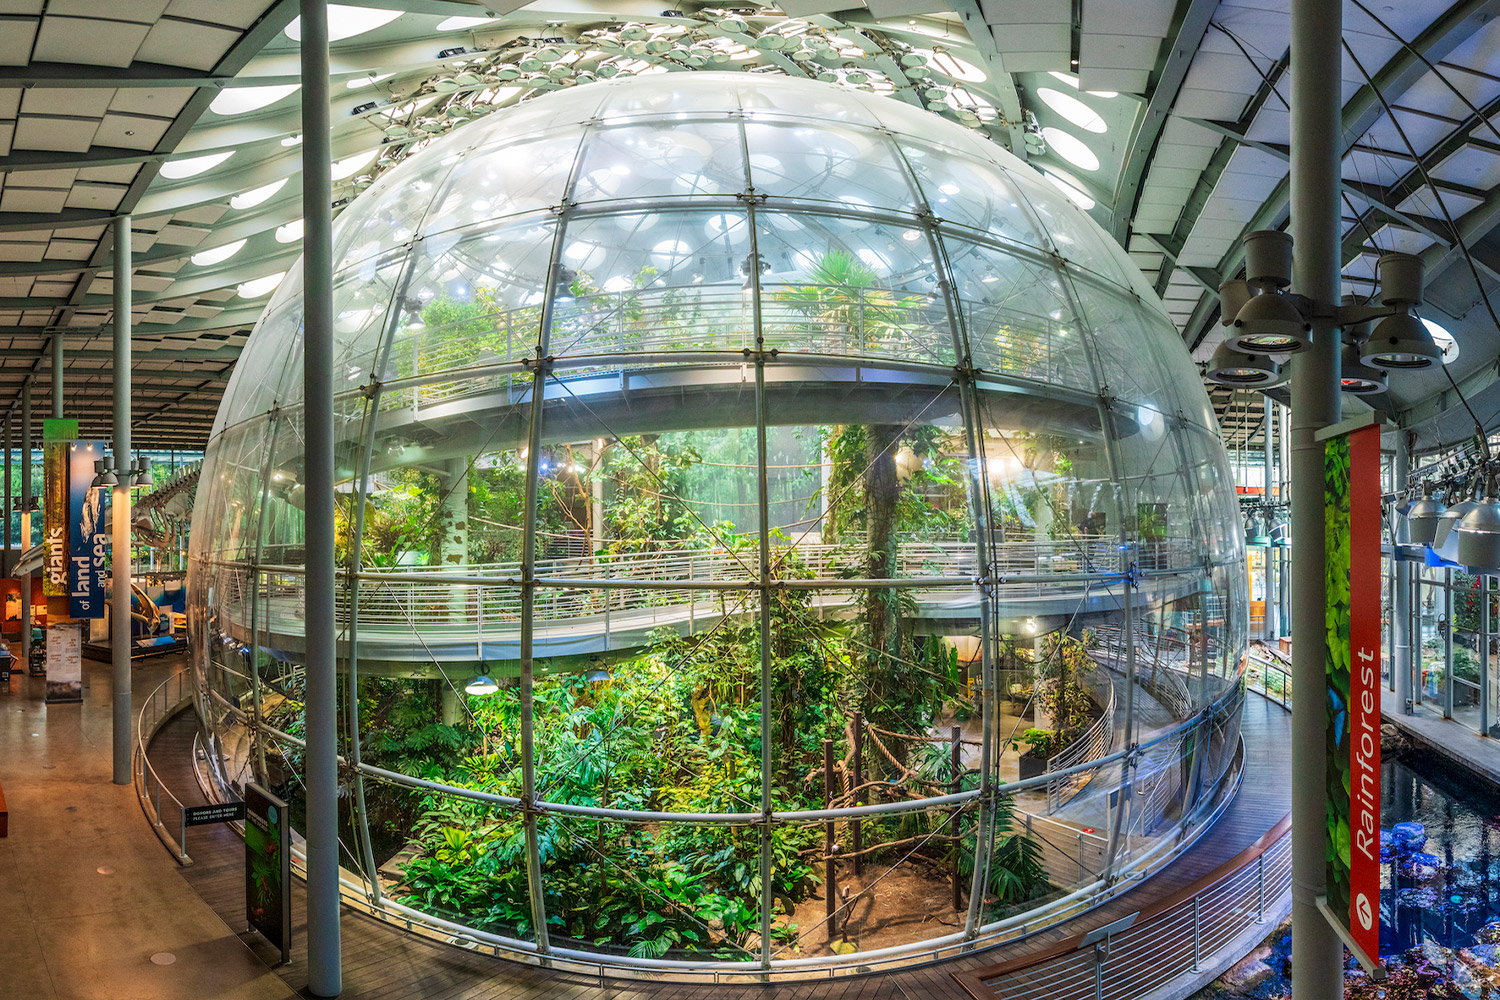 A large indoor dome with a rainforest inside